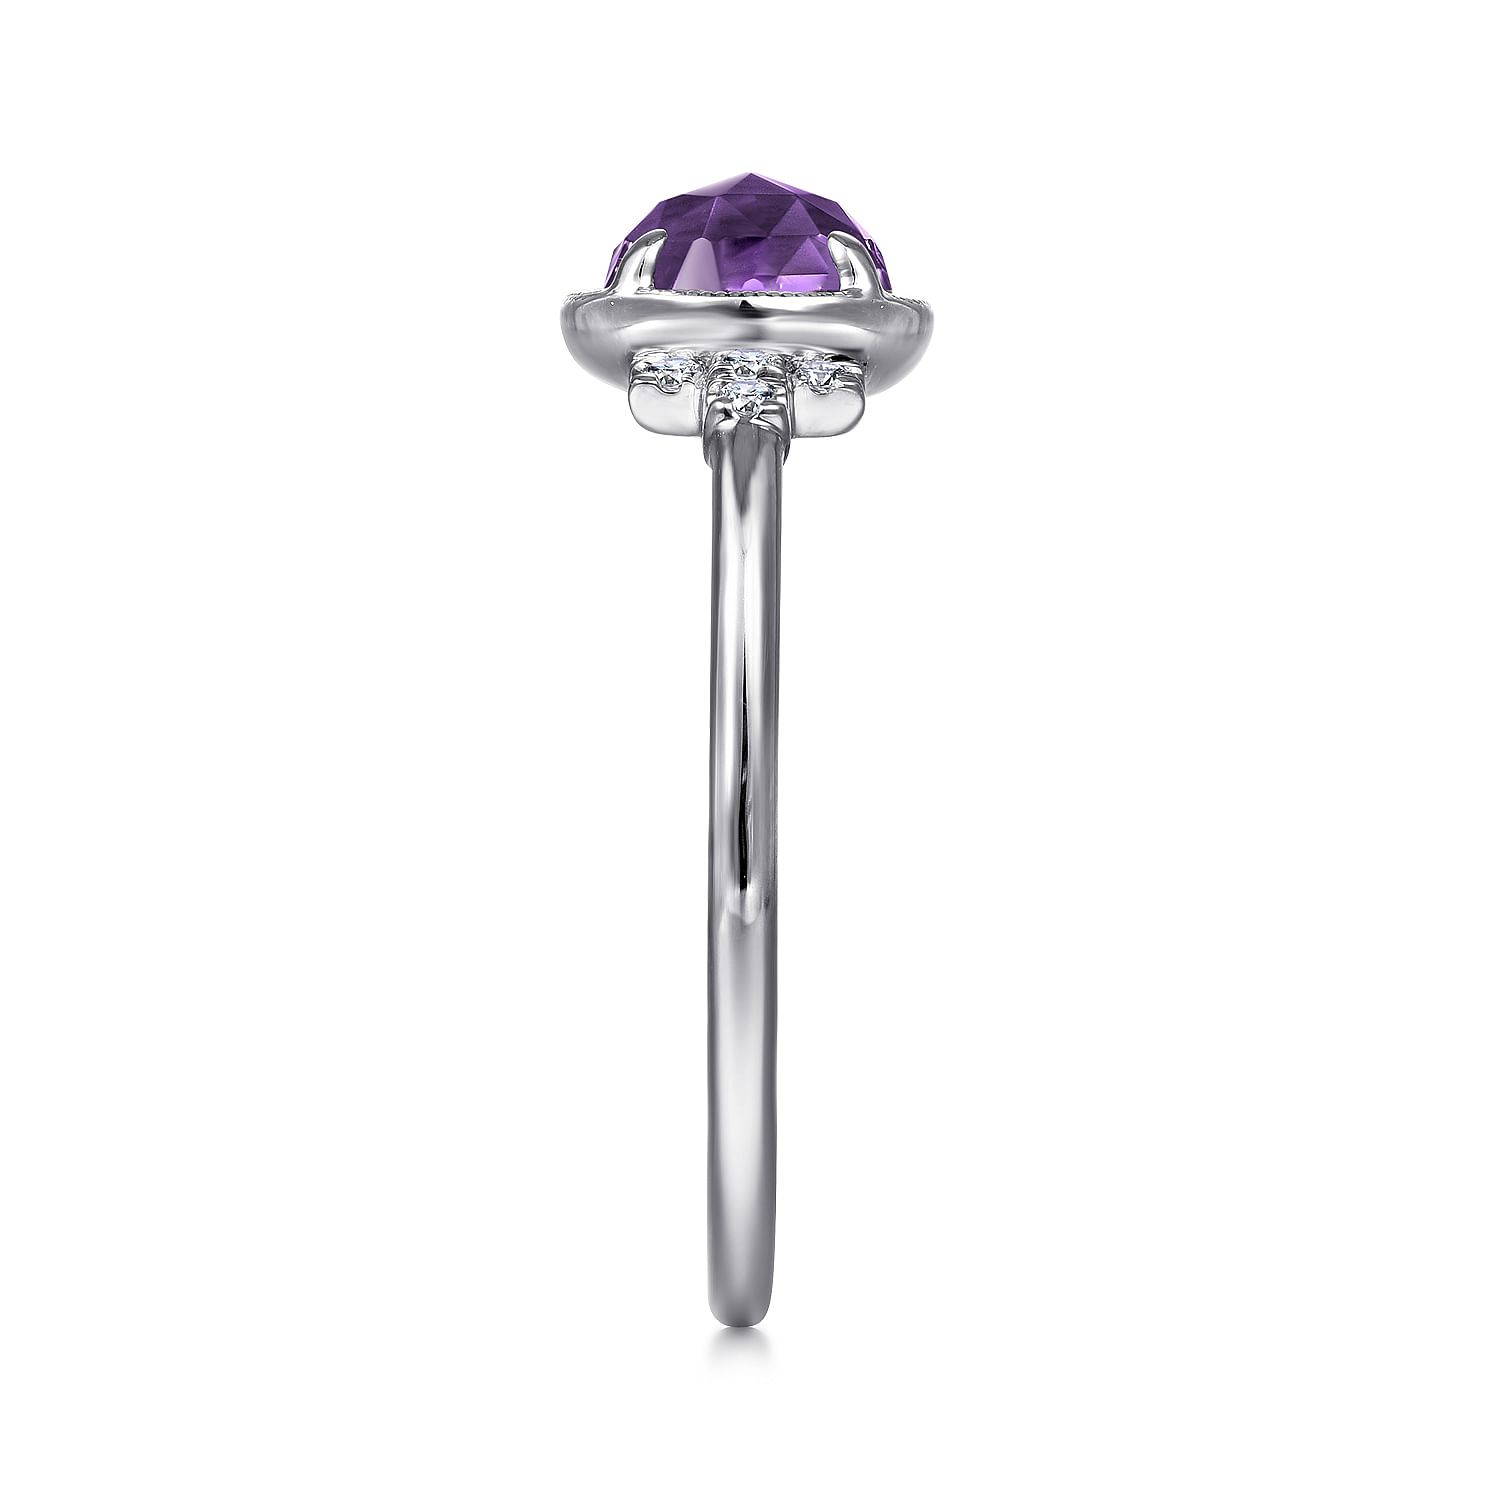 14K White Gold Round Bezel Set Amethyst Ring with Diamond Side Accents